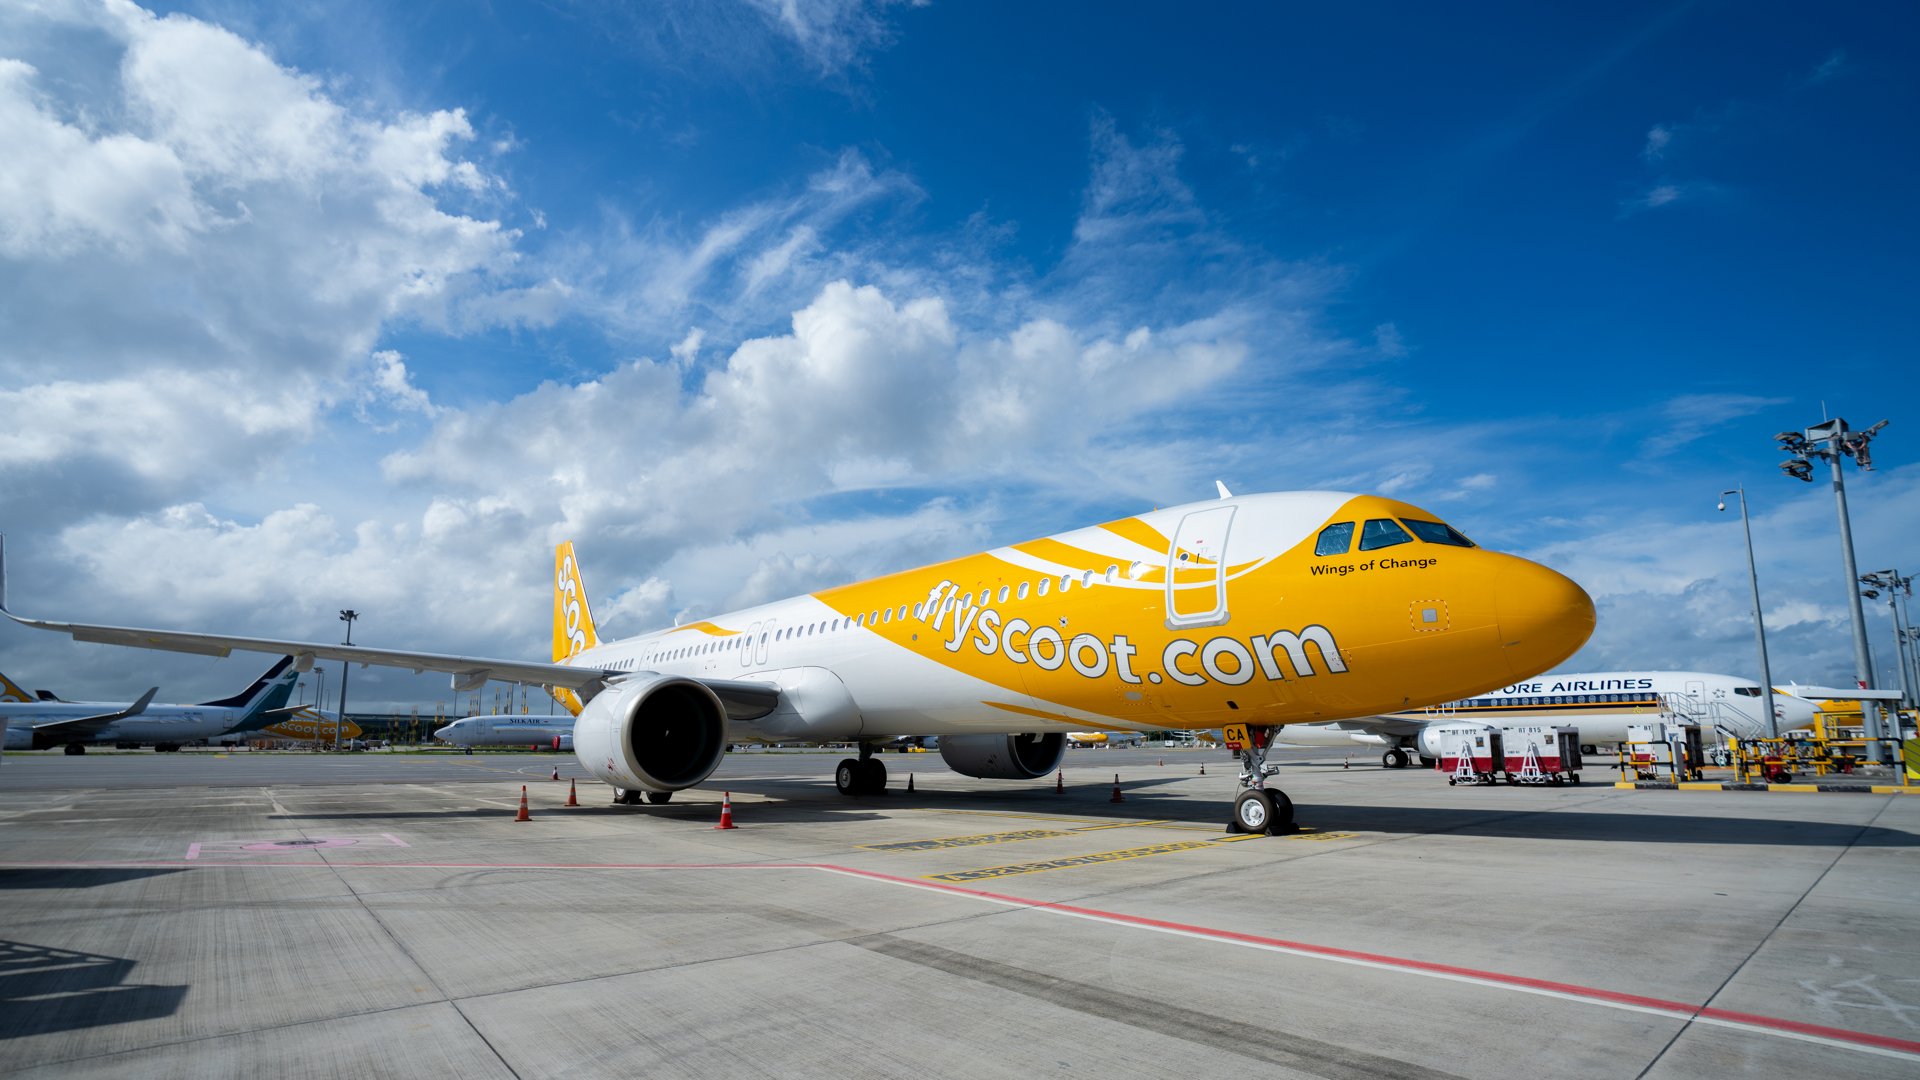 Scoot's 1st A321neo at Singapore Changi Airport